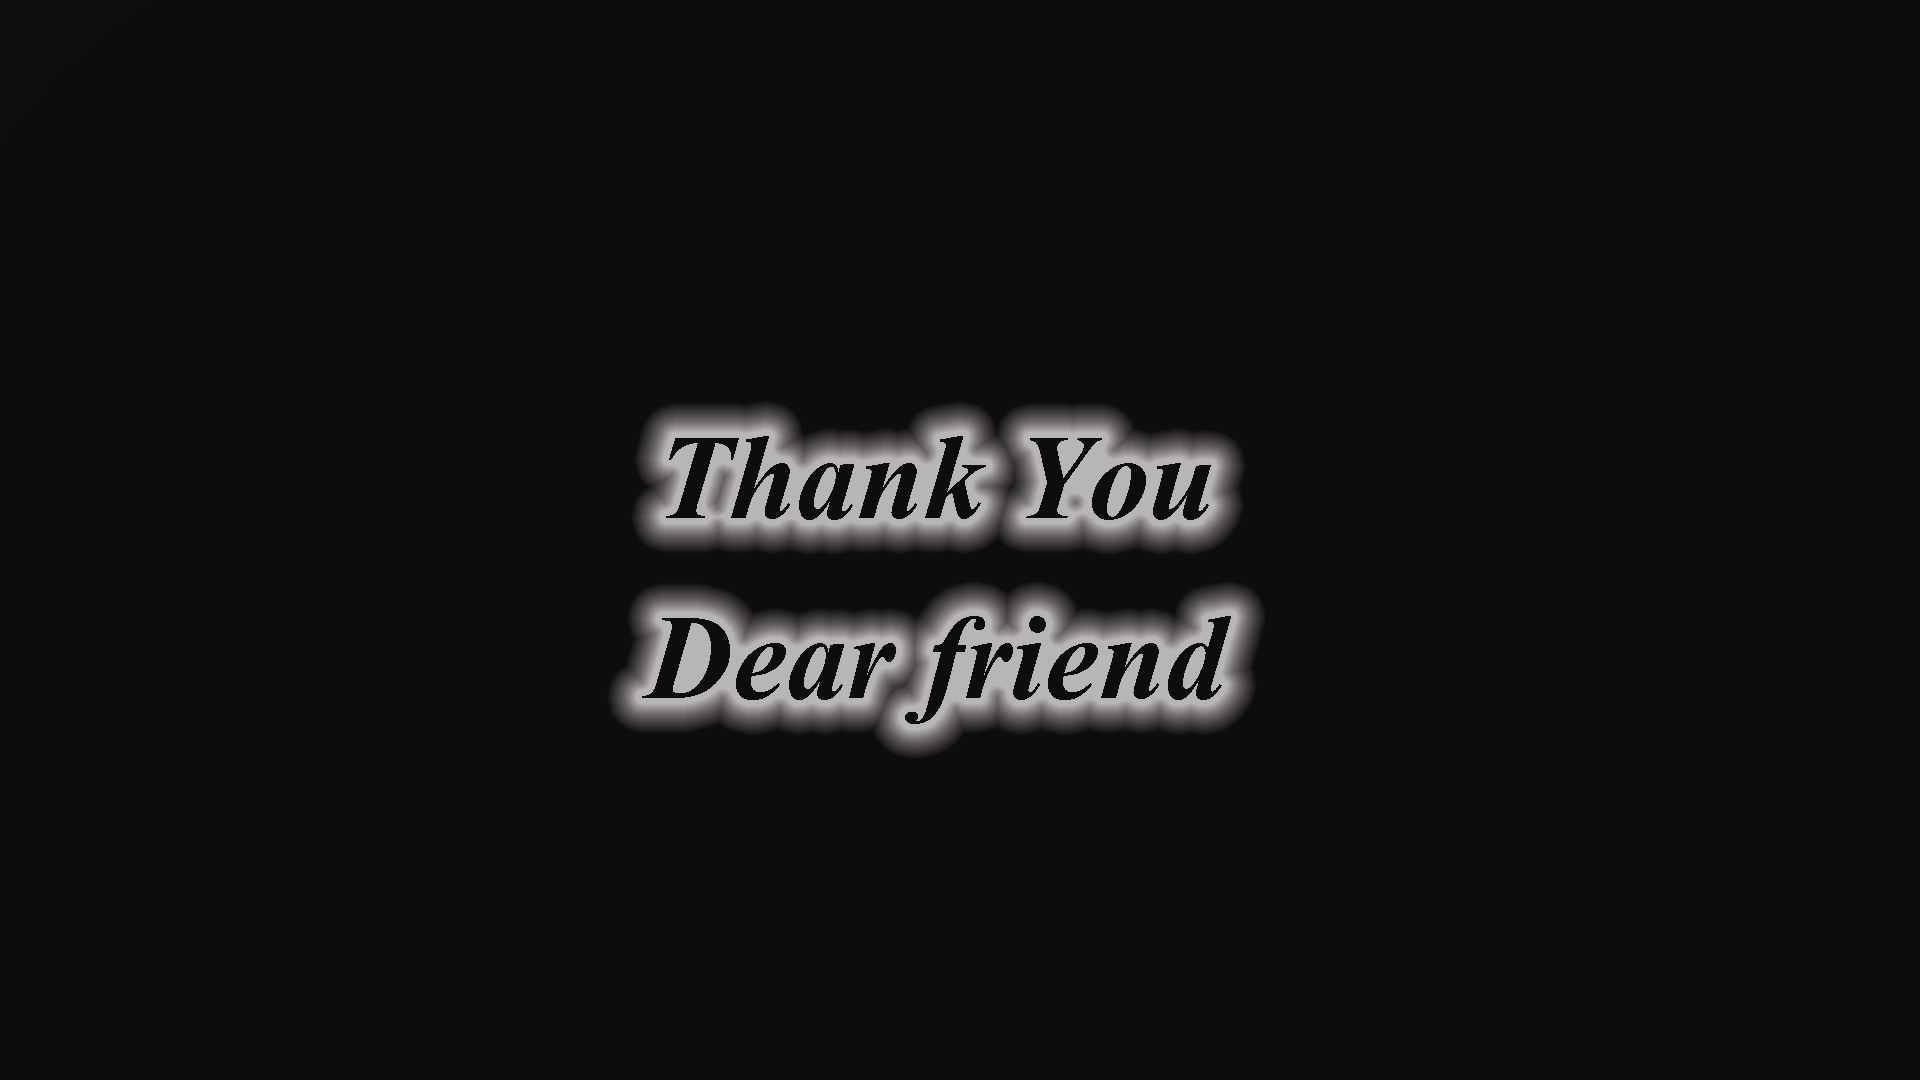 Thank you image for friends